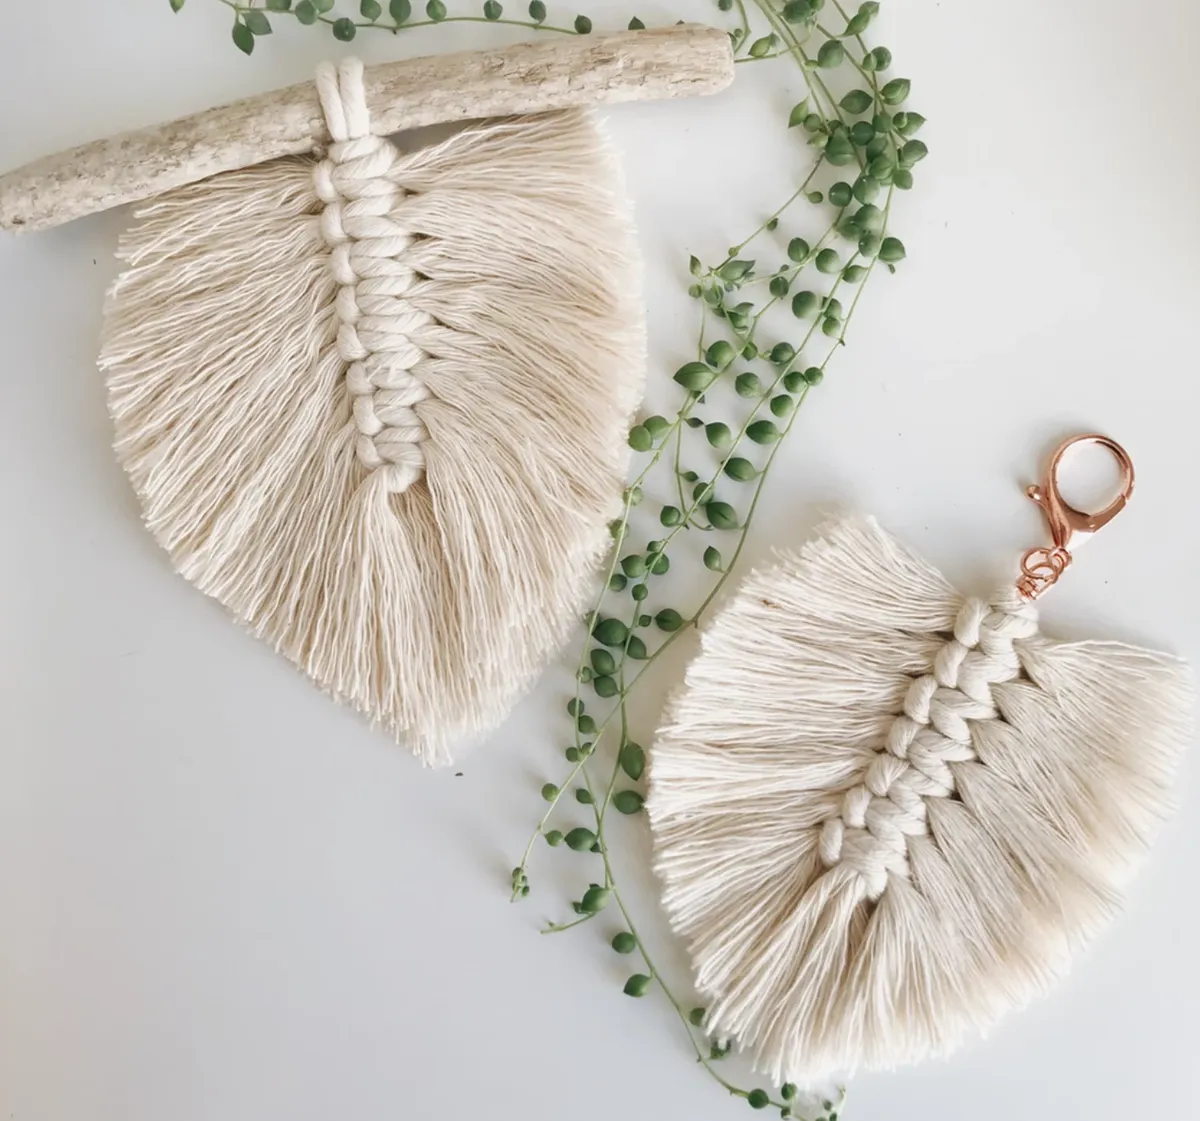 25 Free Macrame Patterns for All Skill Levels - Sarah Maker